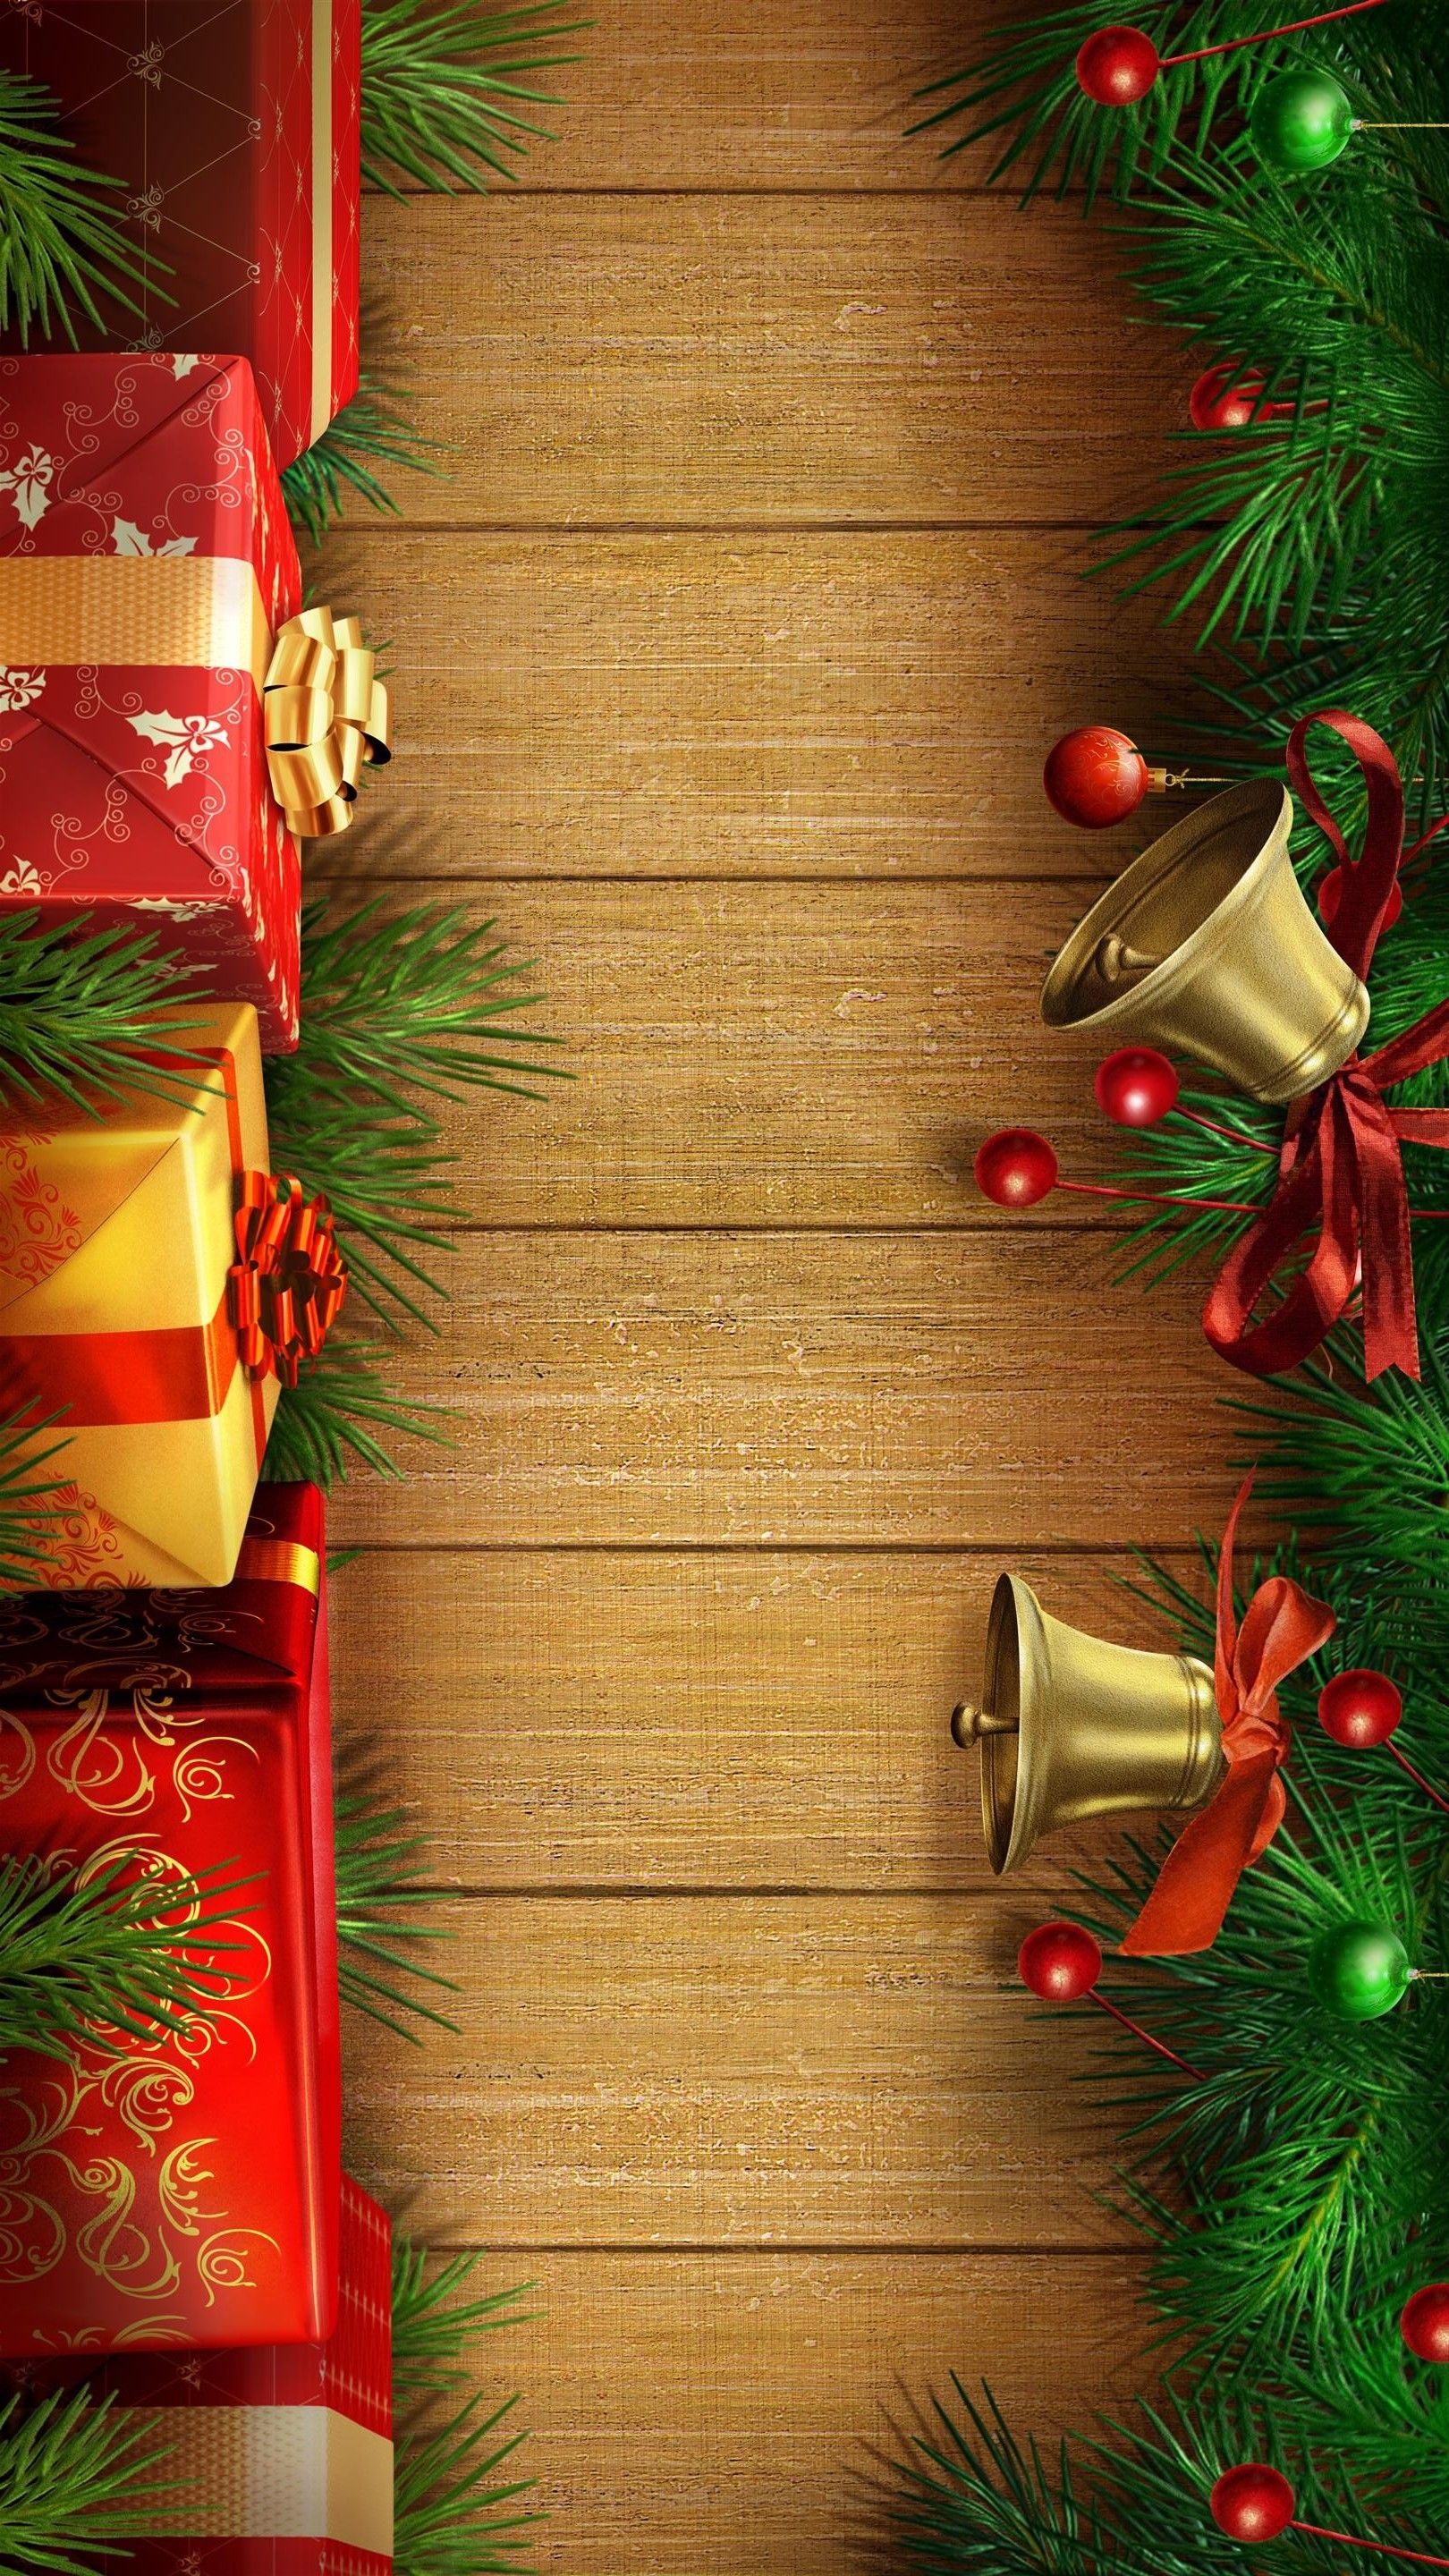 Natal Presents Bells Wood Background Android Wallpaper HD 1080 * 1920